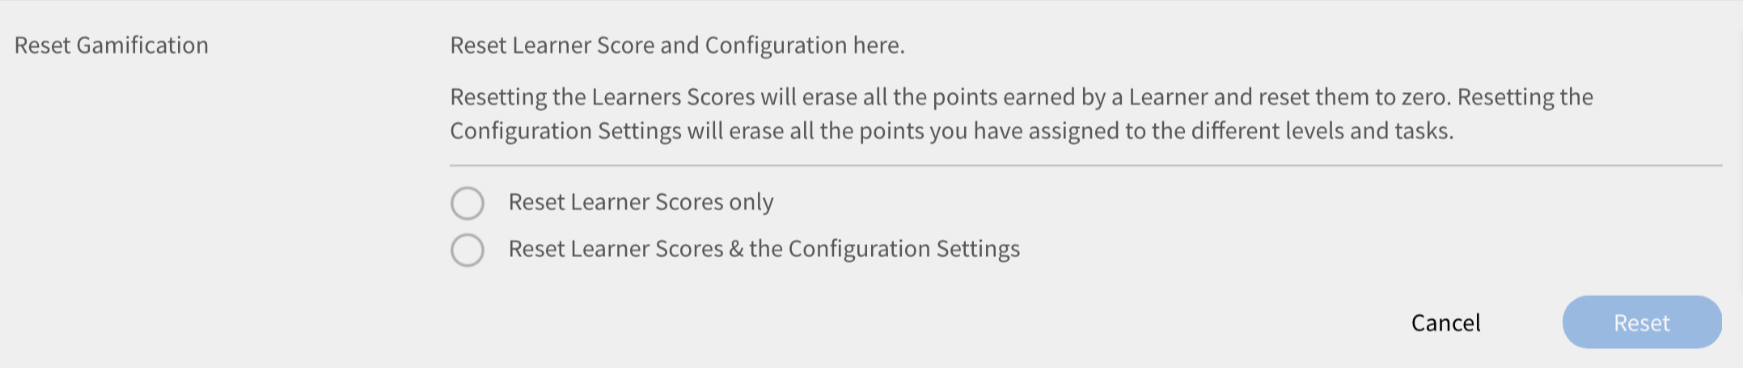 Adobe Learning Manager also supports gamification